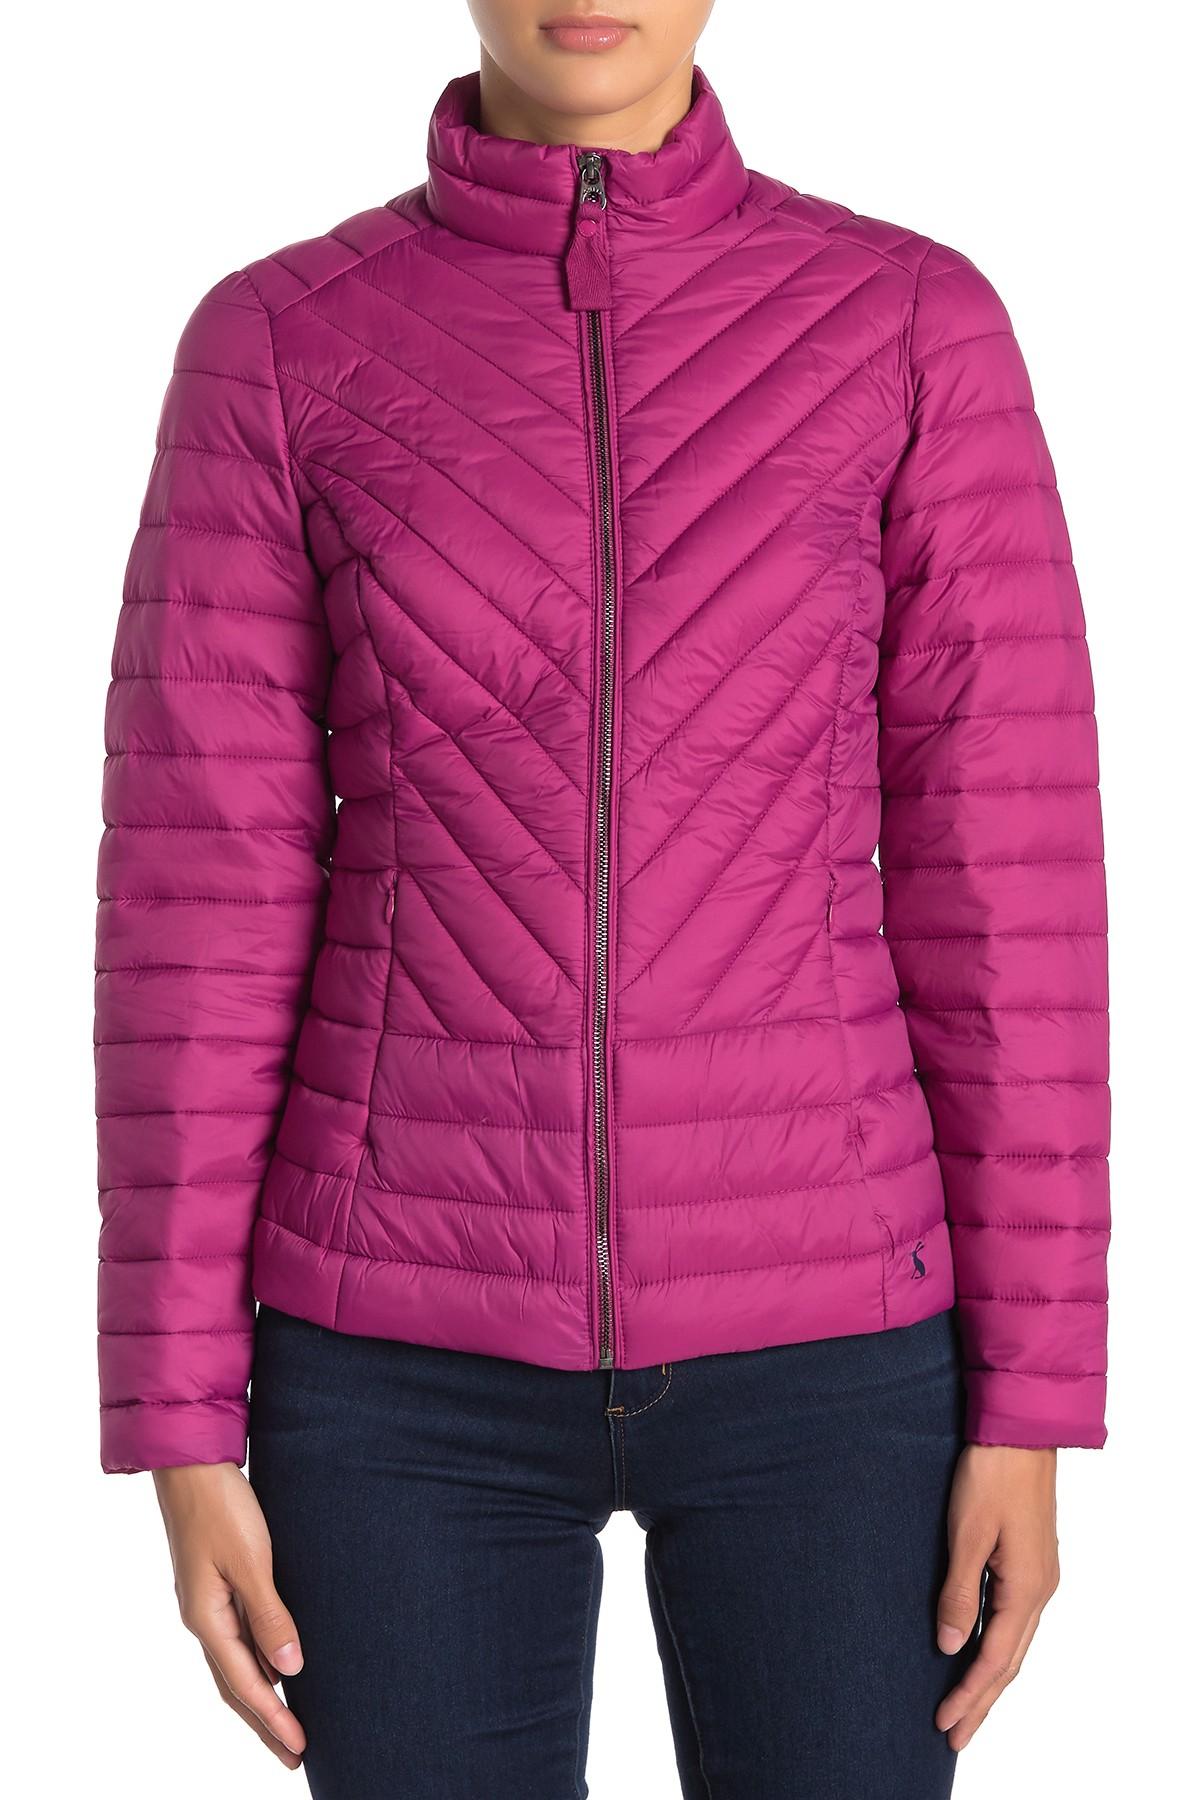 Joules Synthetic Elodie Solid Puffer Jacket in Pink - Lyst